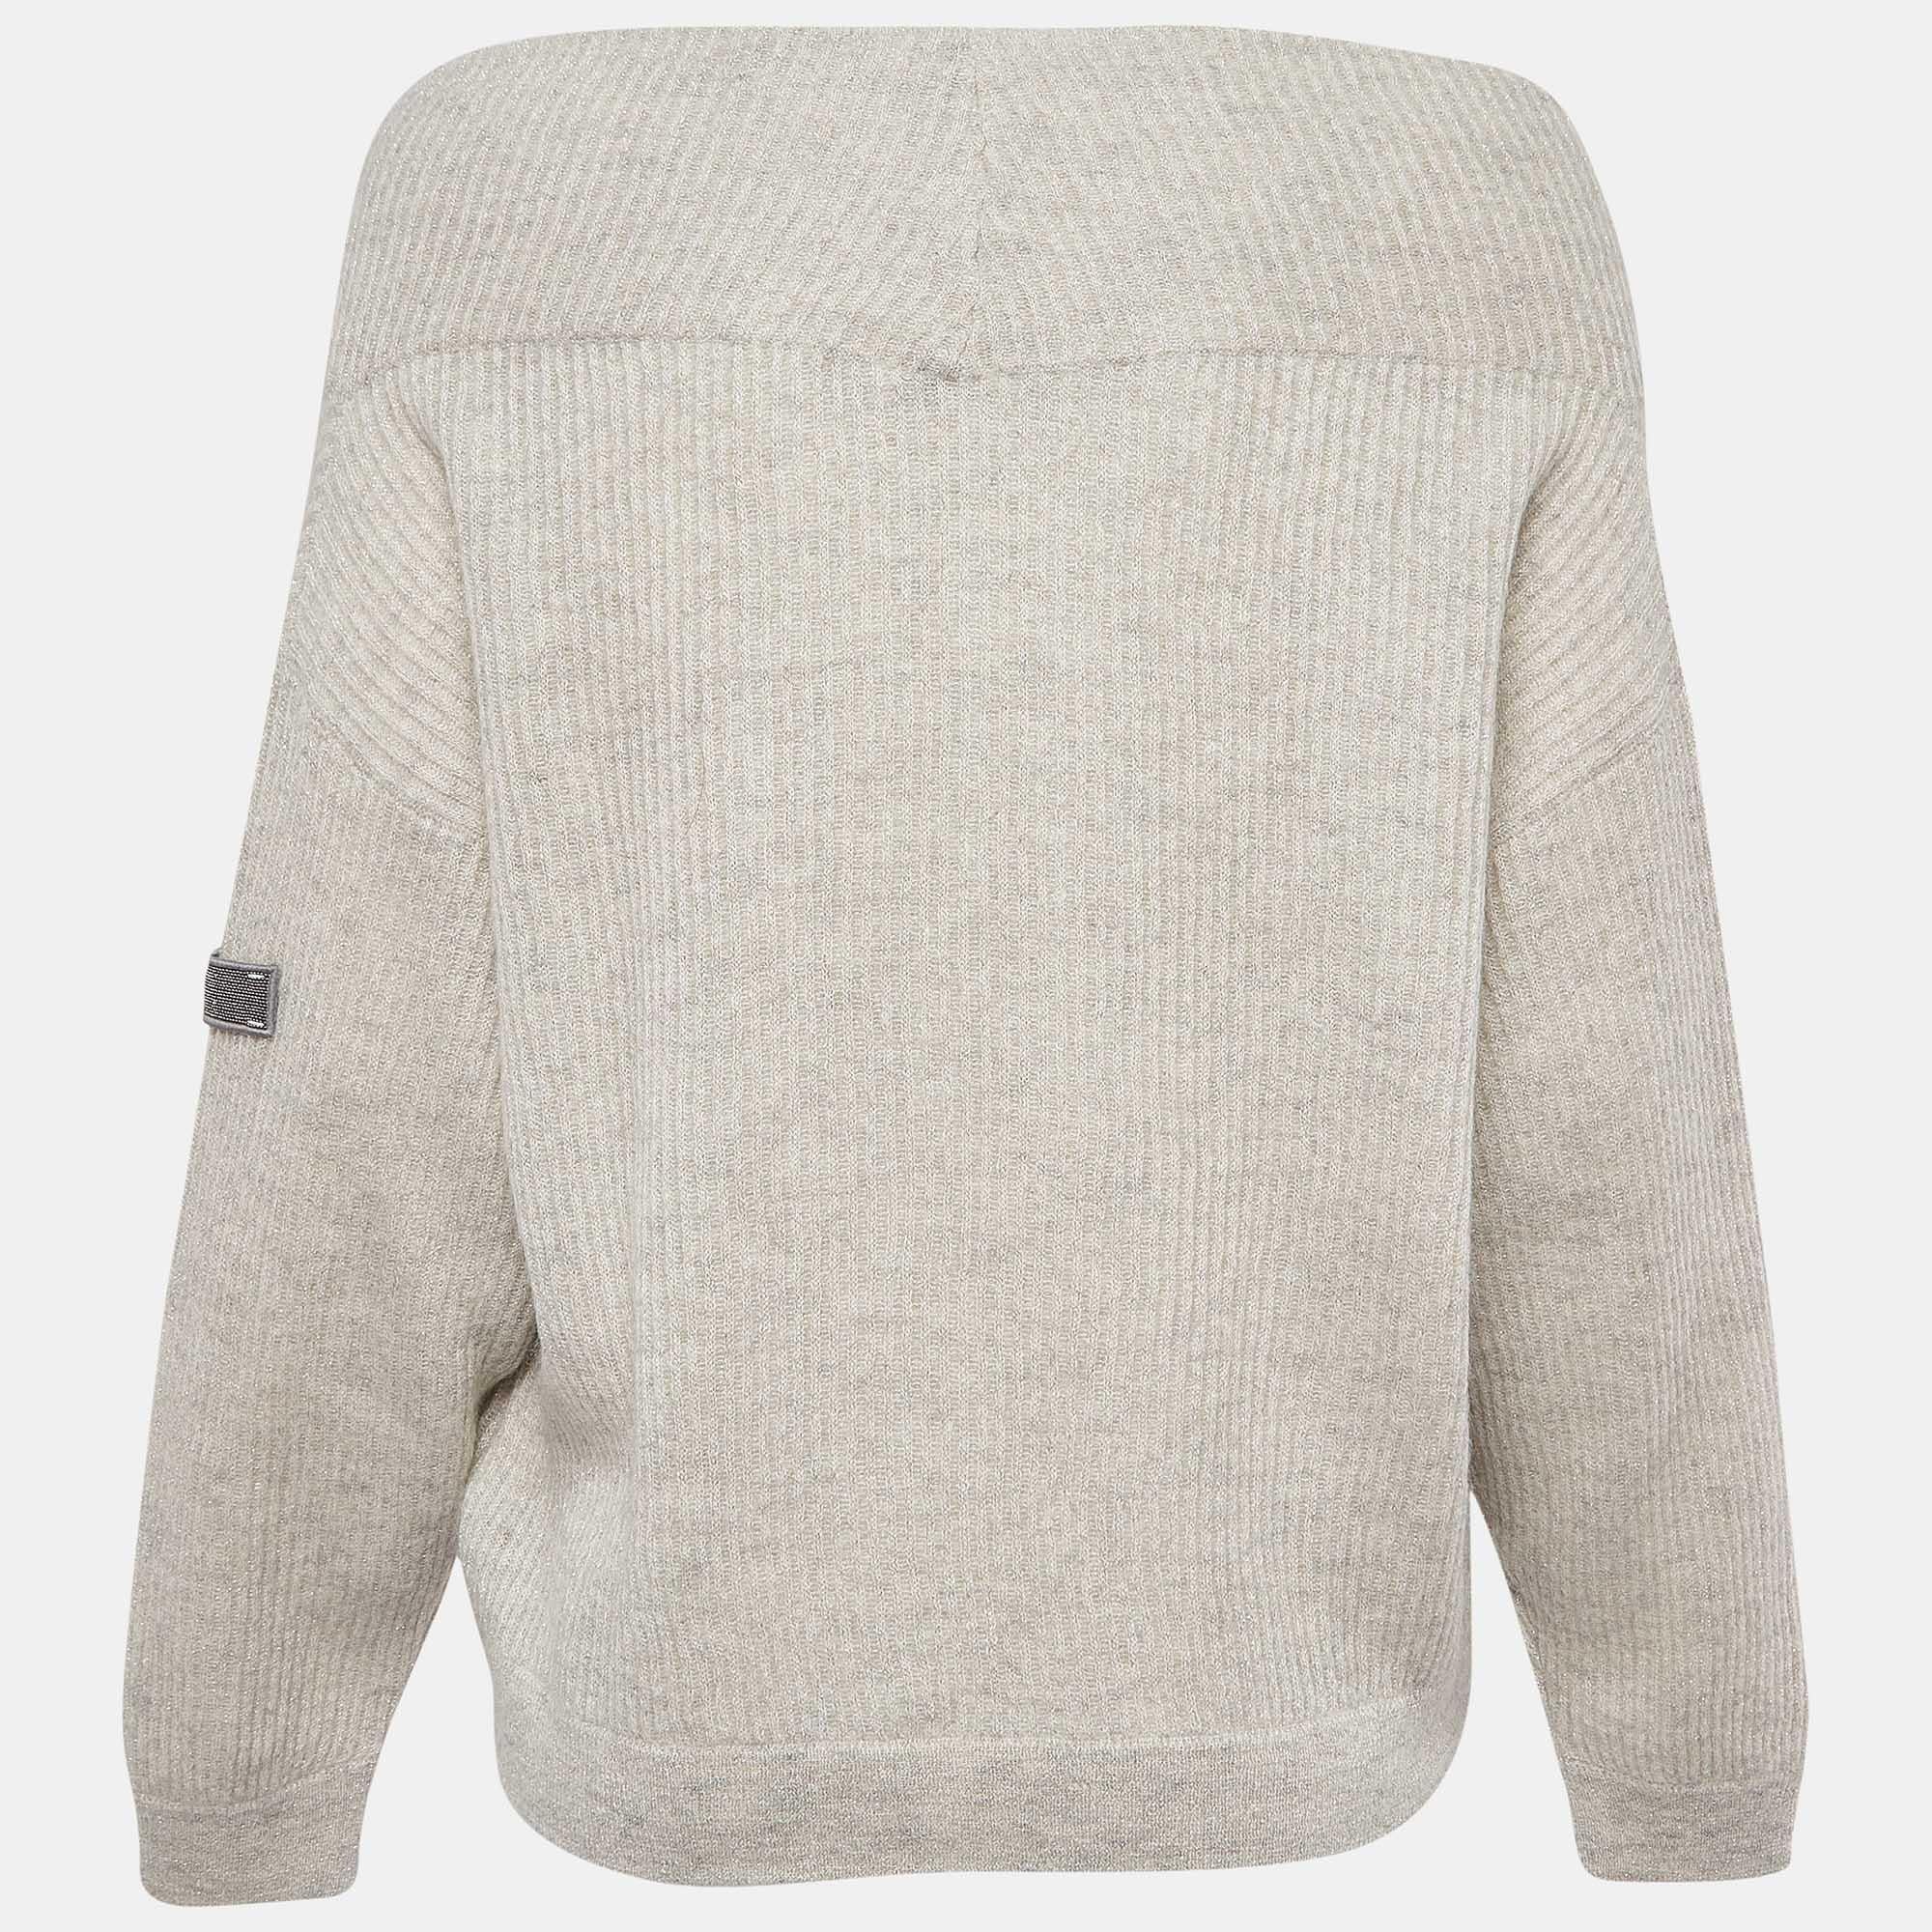 How fabulous does this designer sweater look! It is made of fine materials and features long sleeves. Pair it with pants and sneakers for a cool look.

